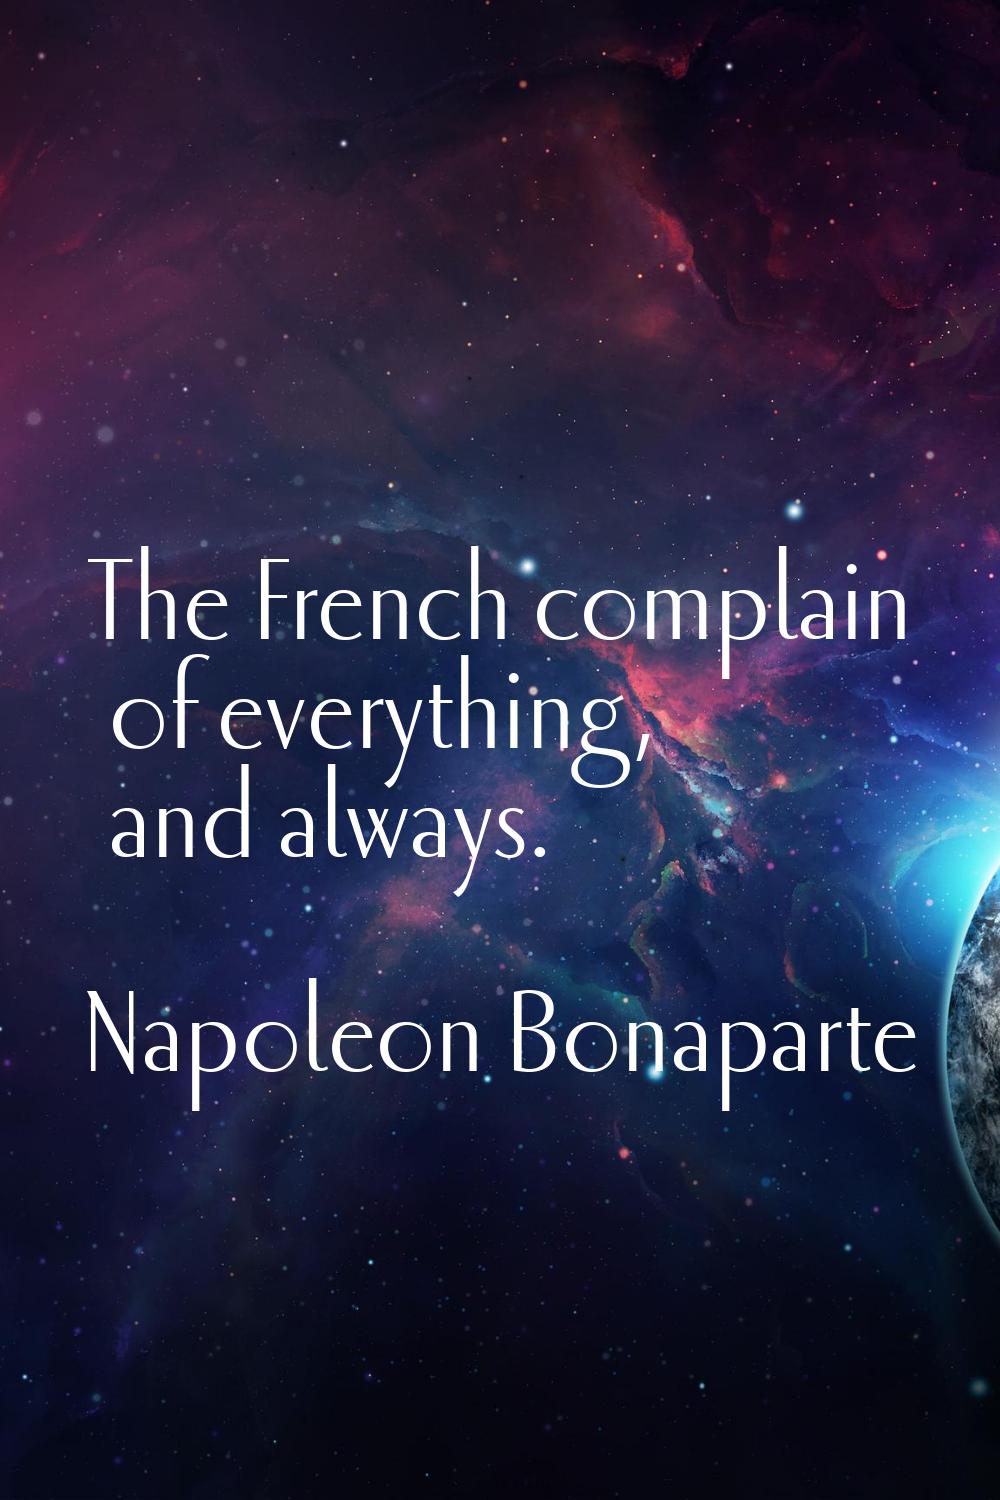 The French complain of everything, and always.